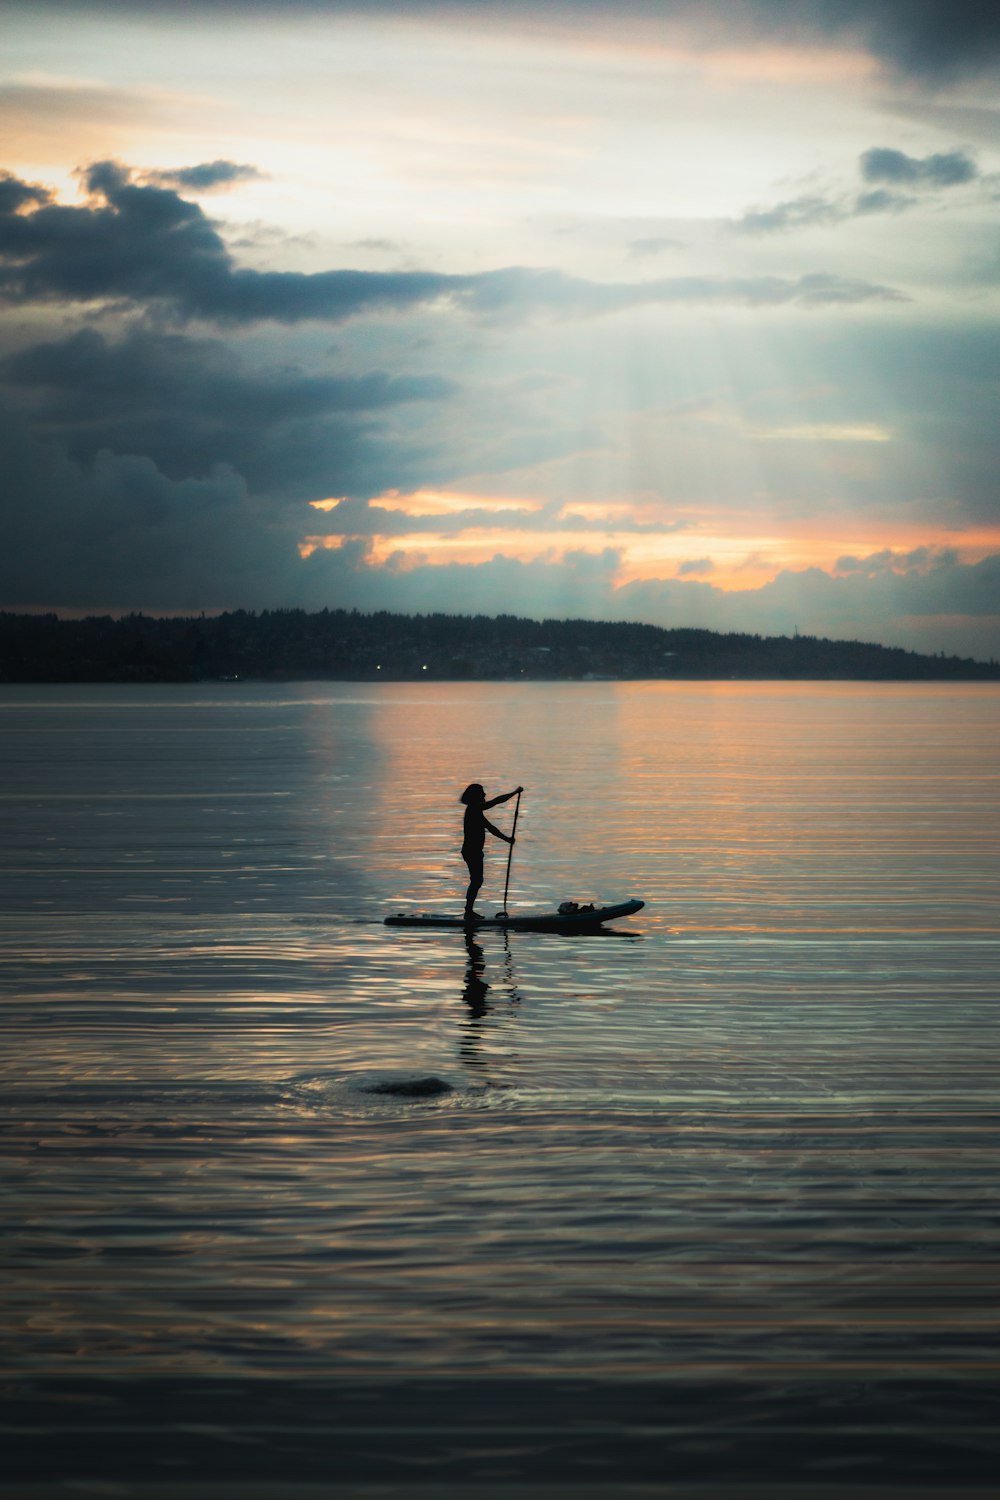 a person riding a paddle board on a body of water